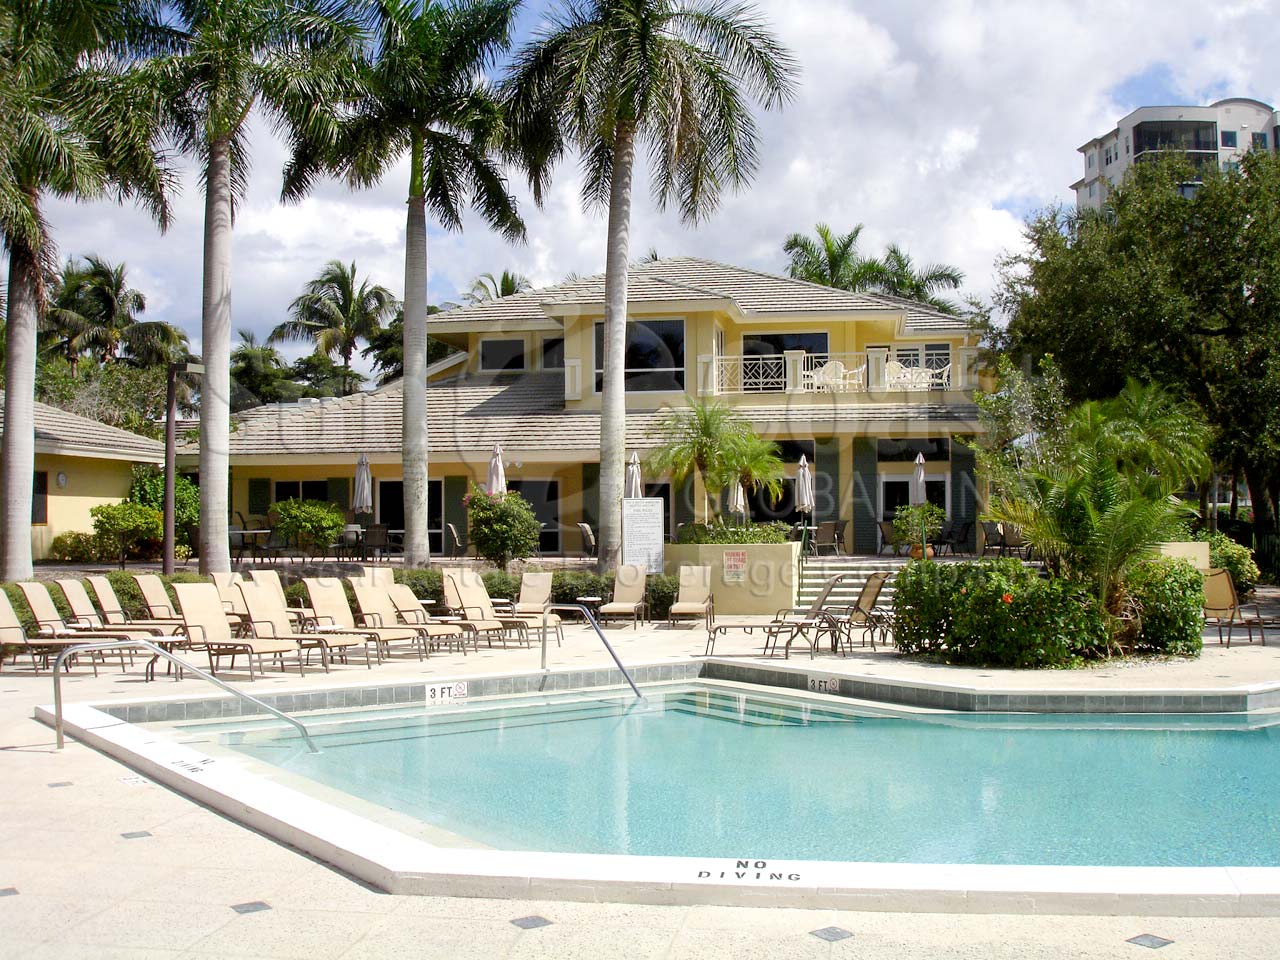 Tarpon Cove Yacht and Racquet Club Community Pool and Clubhouse